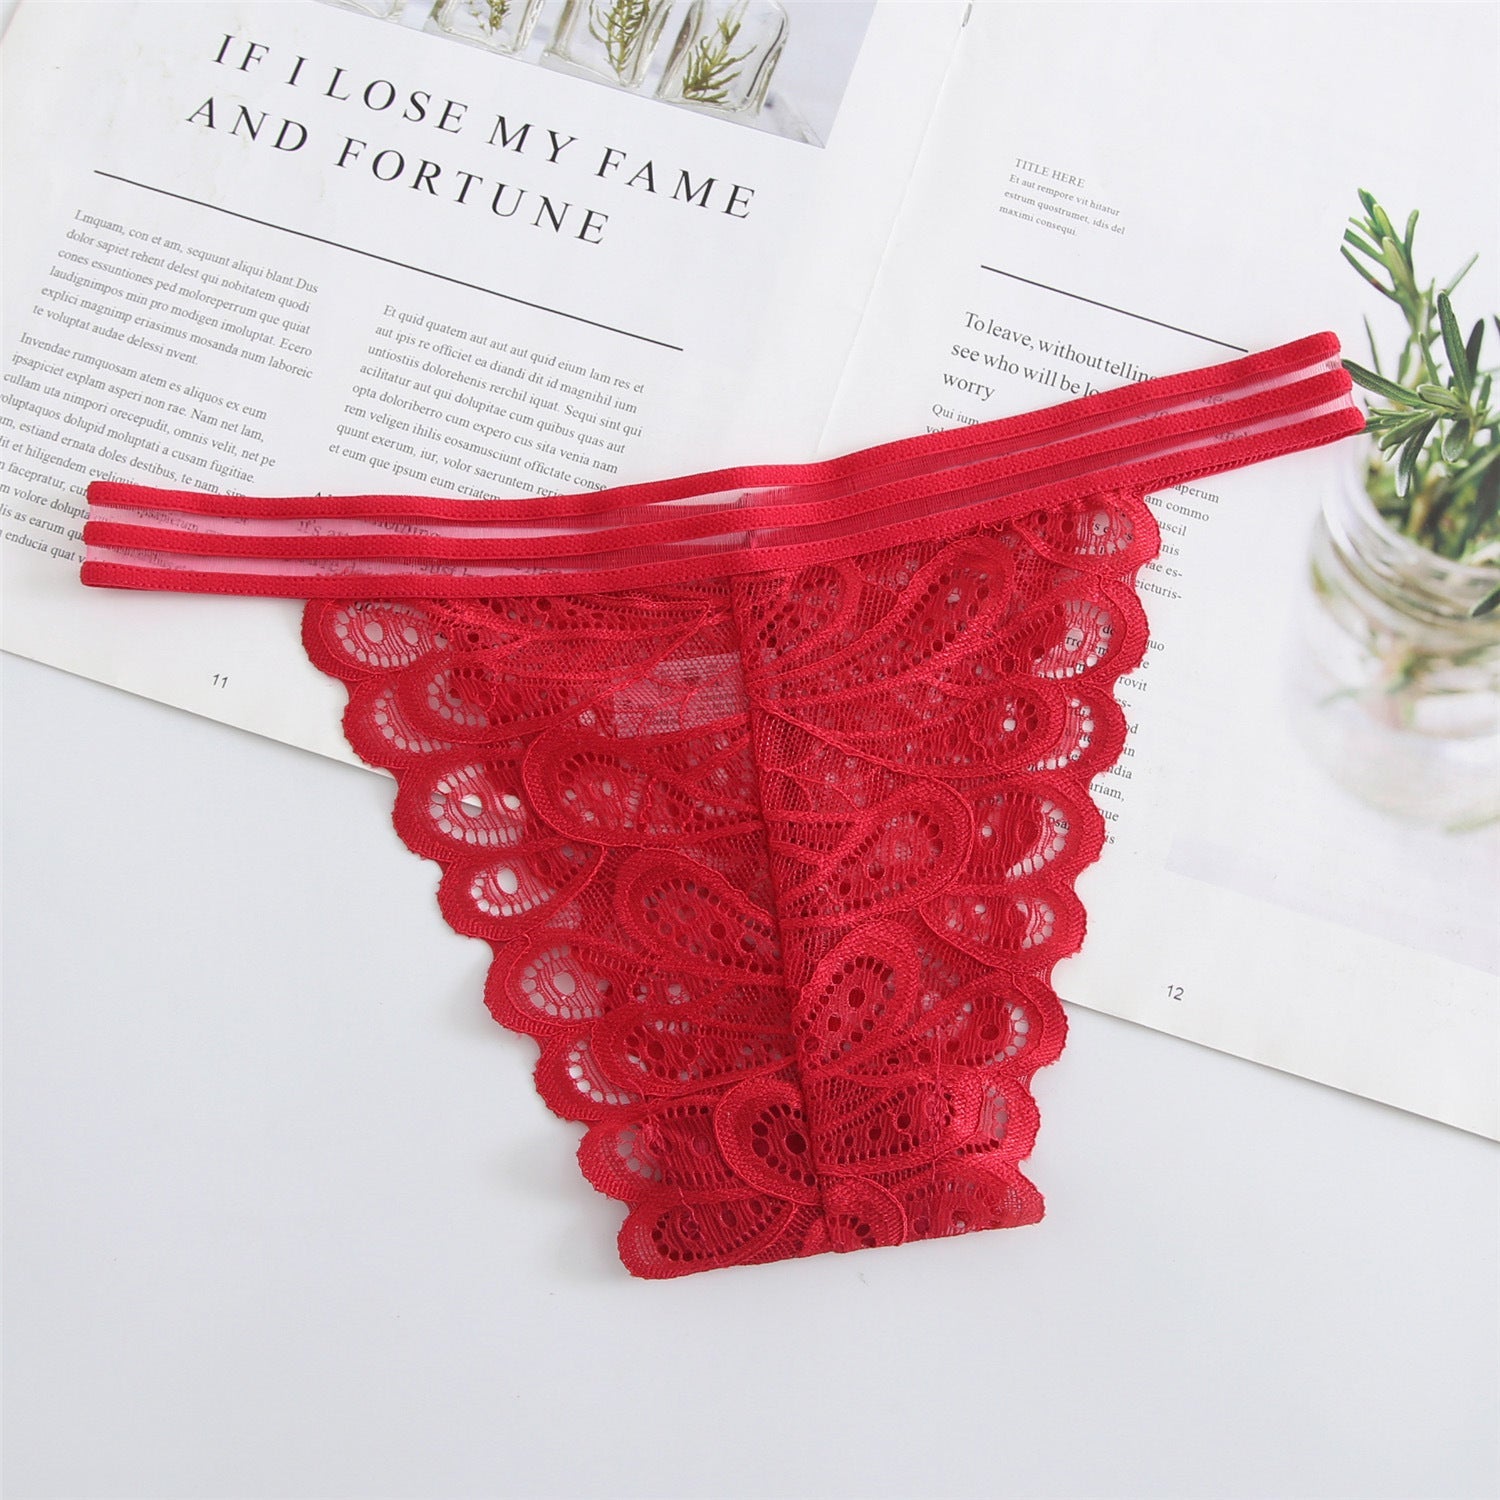 4pack Floral Lace Thong Set